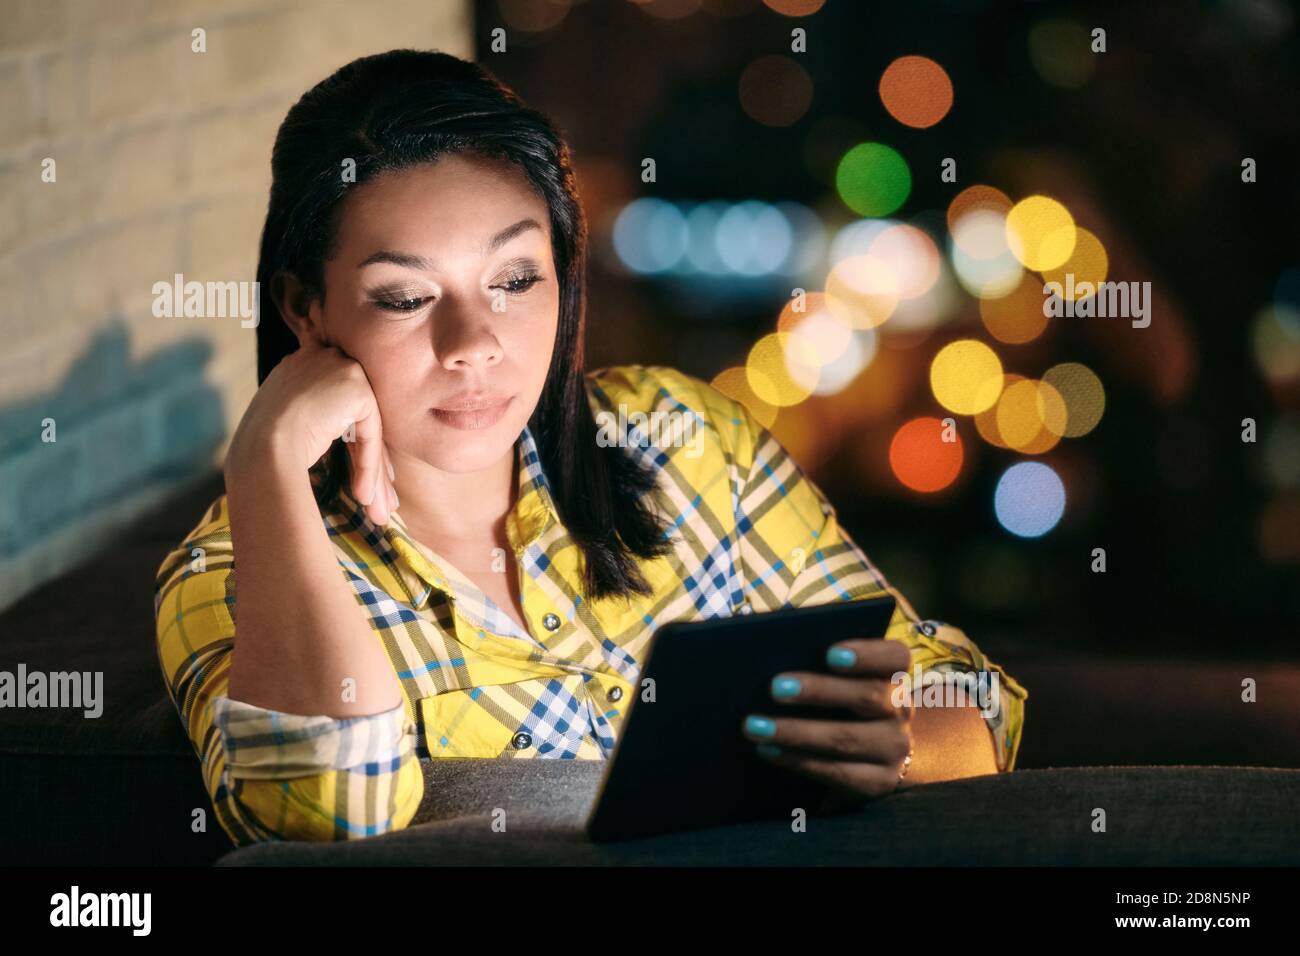 Young Woman Holding Ereader And Reading Ebook At Night Stock Photo